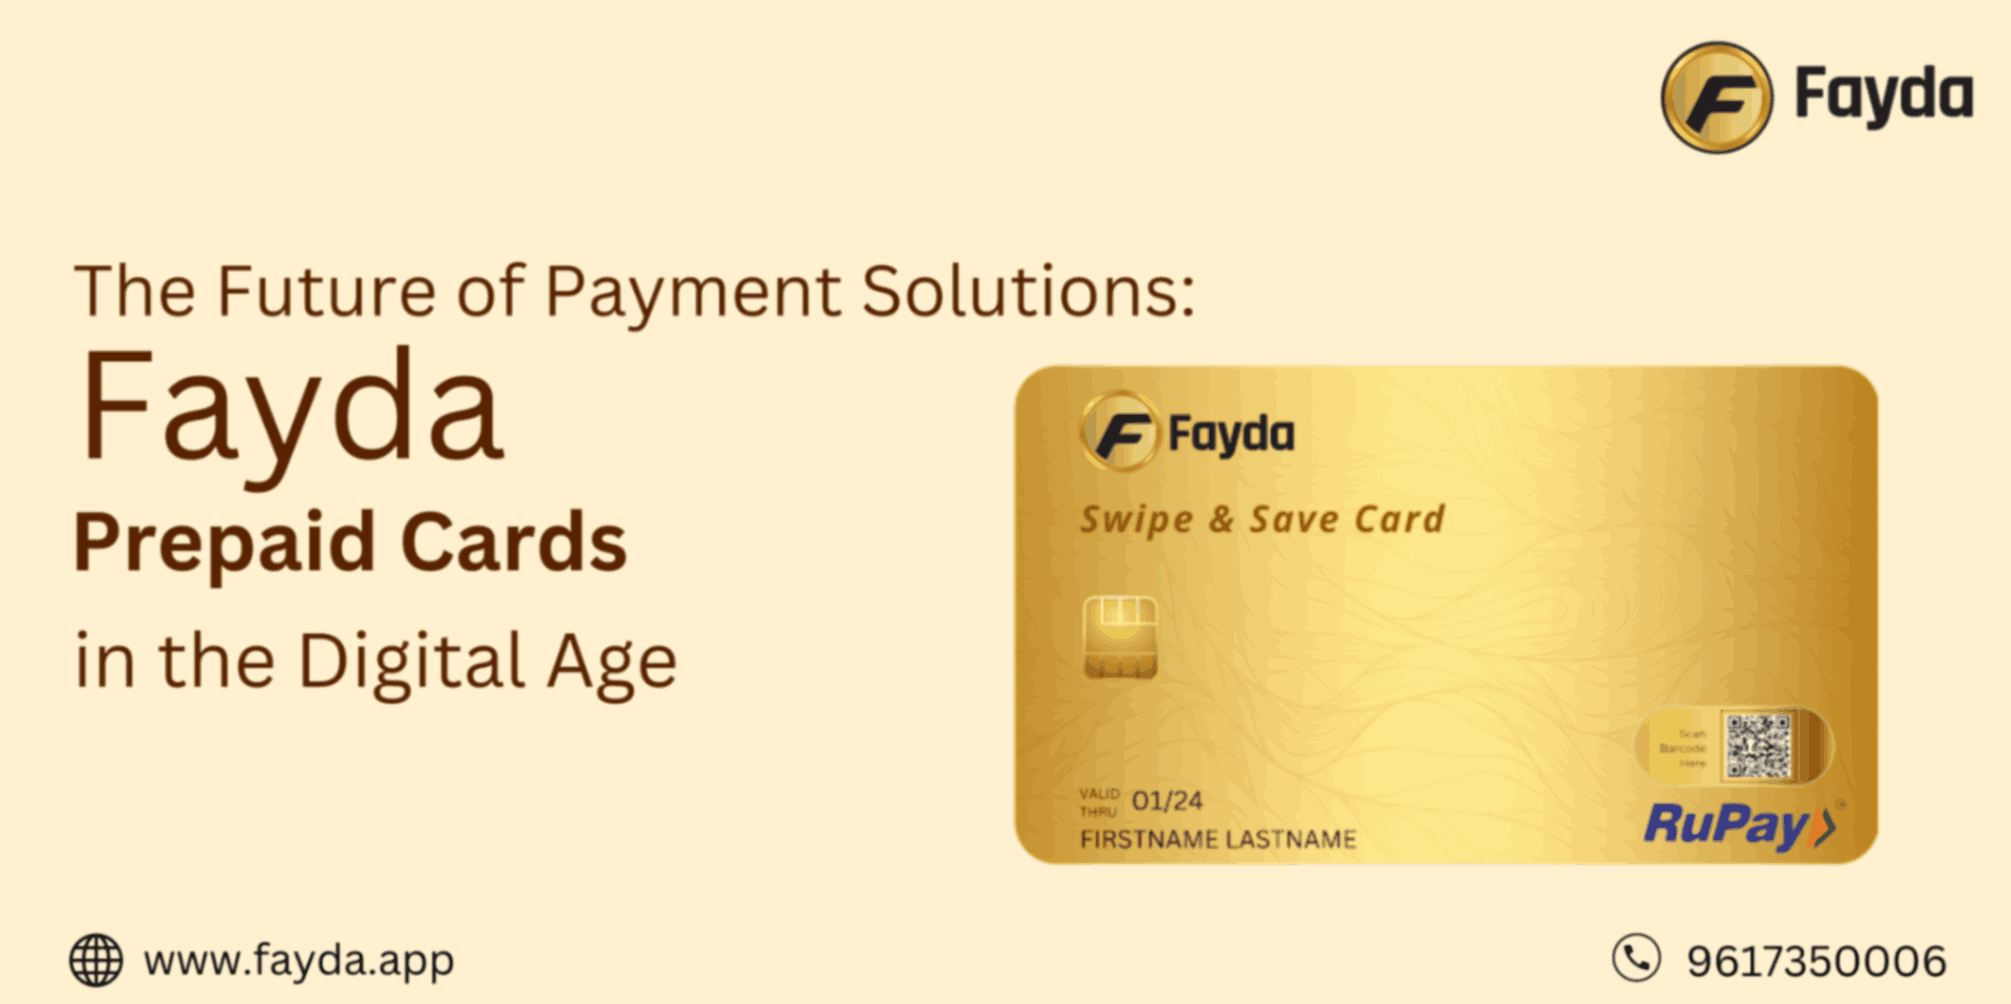 The Future of Payment Solutions: Fayda Prepaid Cards in the Digital Age